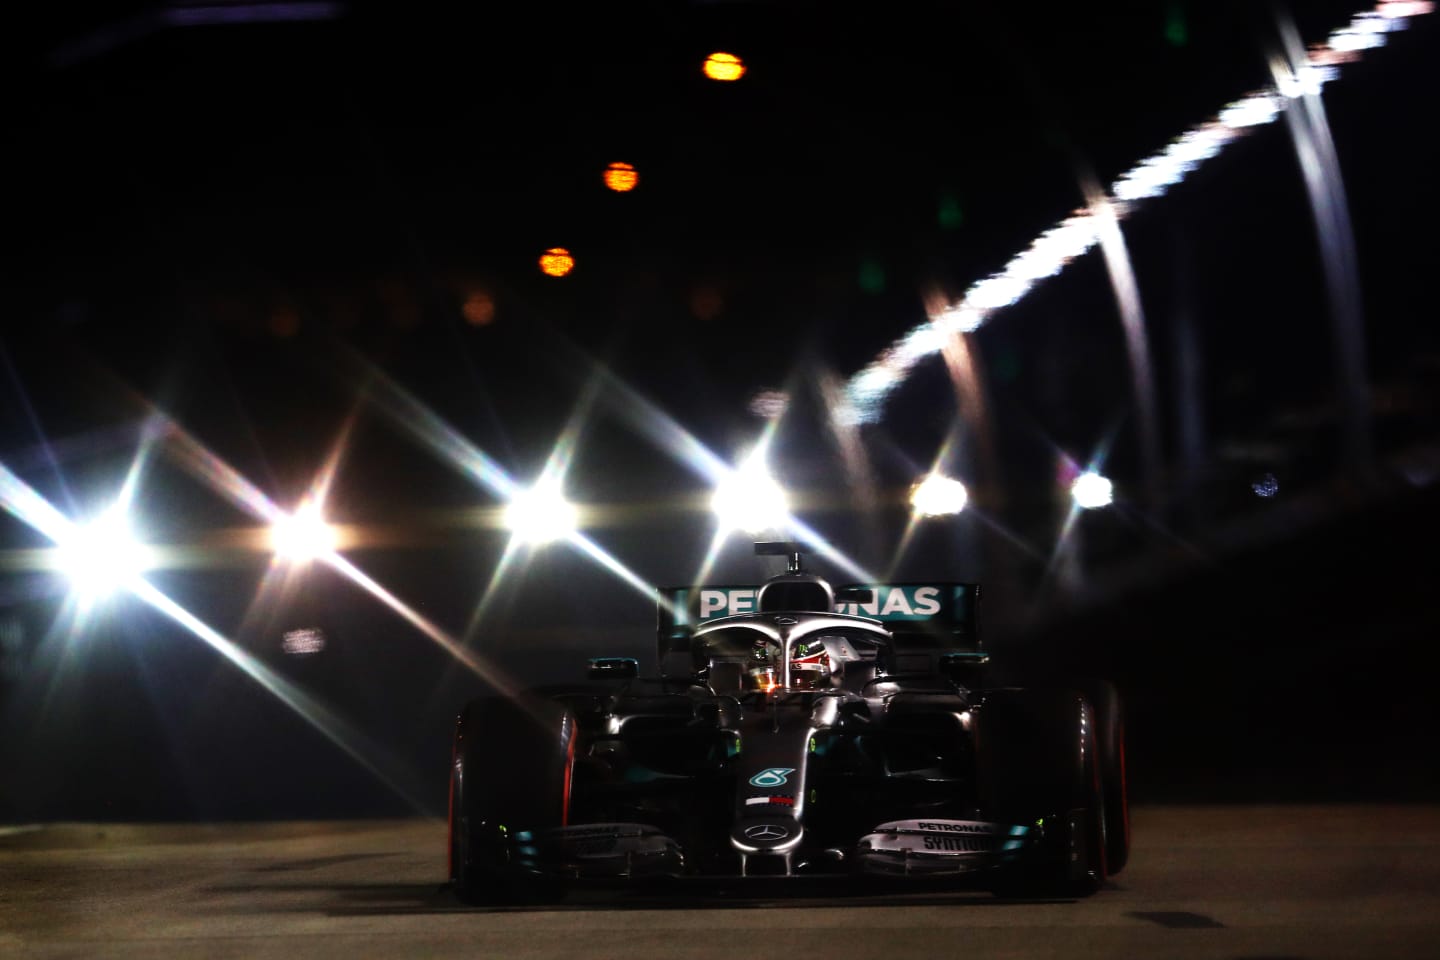 SINGAPORE, SINGAPORE - SEPTEMBER 21: Lewis Hamilton of Great Britain driving the (44) Mercedes AMG Petronas F1 Team Mercedes W10 on track during qualifying for the F1 Grand Prix of Singapore at Marina Bay Street Circuit on September 21, 2019 in Singapore. (Photo by Lars Baron/Getty Images)